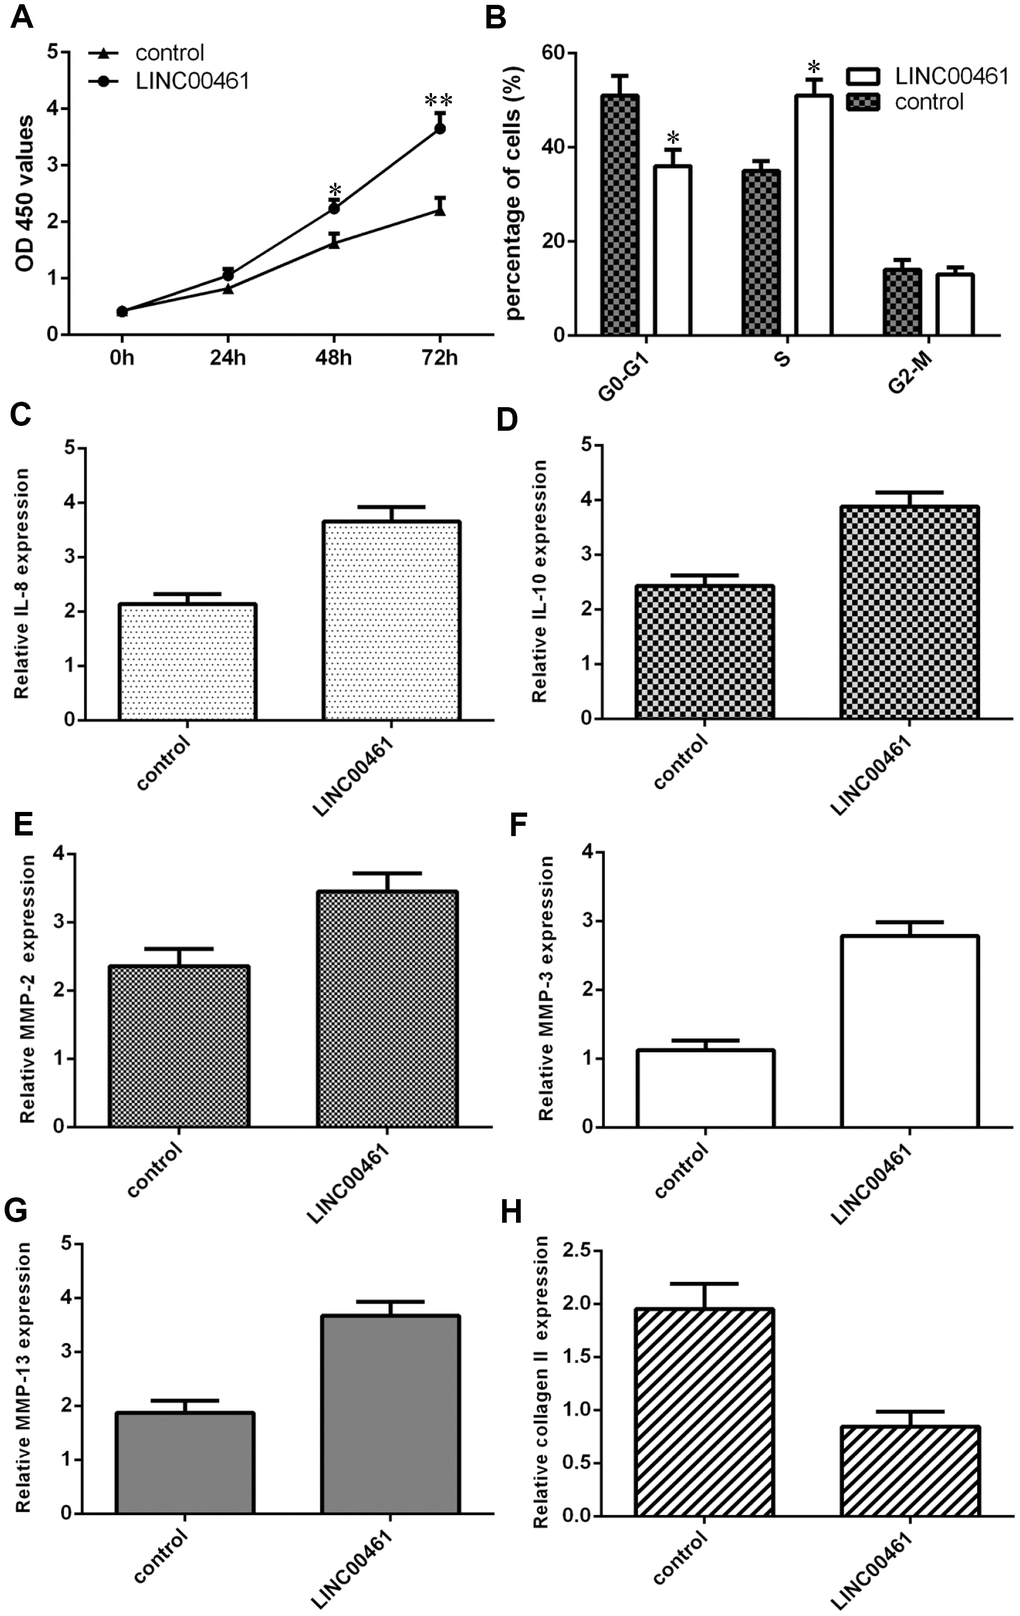 Elevated expression of LINC00461 induced chondrocyte proliferation, cell cycle progression, inflammation, and extracellular matrix (ECM) degradation. (A) Overexpression of LINC00461 enhanced cell proliferation in chondrocytes. (B) Elevated expression of LINC00461 increased cell cycle progression in chondrocytes. (C) IL-6 expression was upregulated in chondrocytes after LINC00461 treatment. (D) LINC00461 overexpression enhanced IL-10 expression in chondrocytes. (E) Ectopic expression of LINC00461 promoted MMP-2 expression in chondrocytes. (F) The expression level of MMP-3 was increased in chondrocytes after LINC00461 treatment. (G) Elevated expression of LINC00461 enhanced MMP-13 expression. (H) The expression of type II collagen was measured by qRT-PCR assay. *p